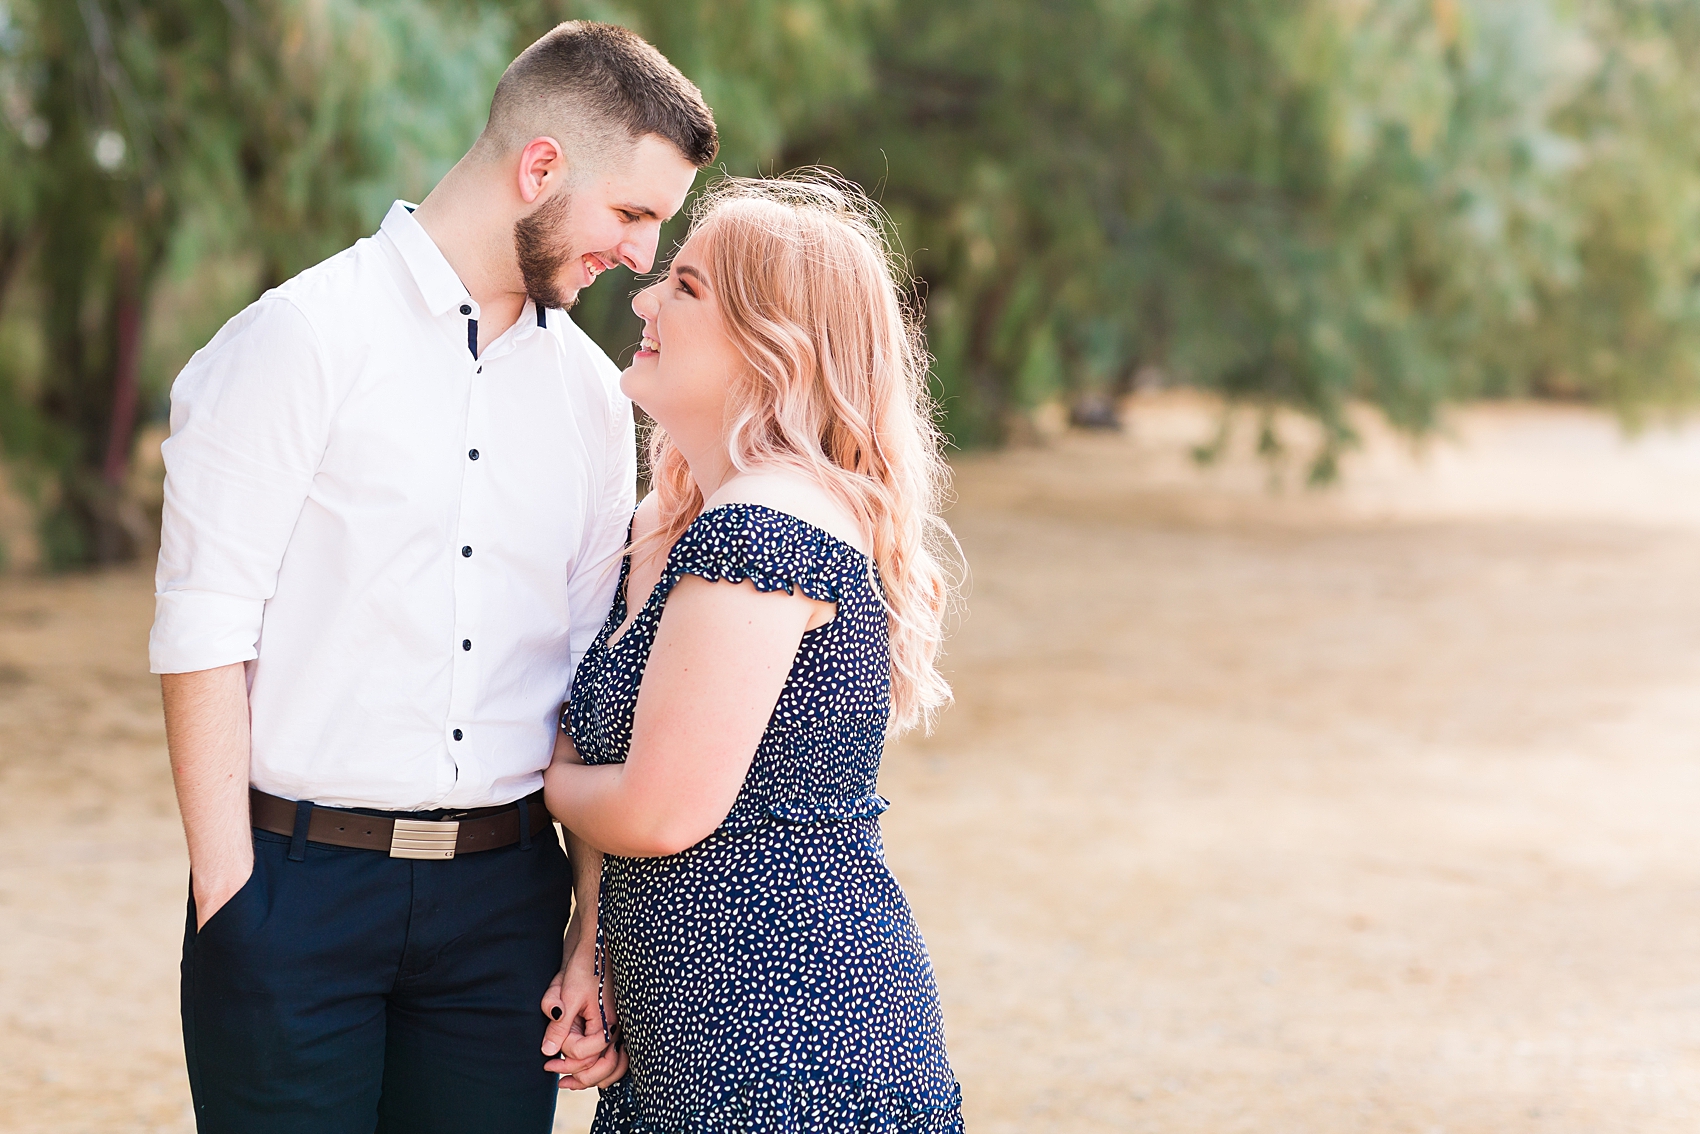 Leah Hope Photography | Scottsdale Cave Creek Phoenix Arizona | Desert Landscape Cactus Scenery | Engagement Pictures | Engaged | Married | In Love | Couples Poses | What to Wear